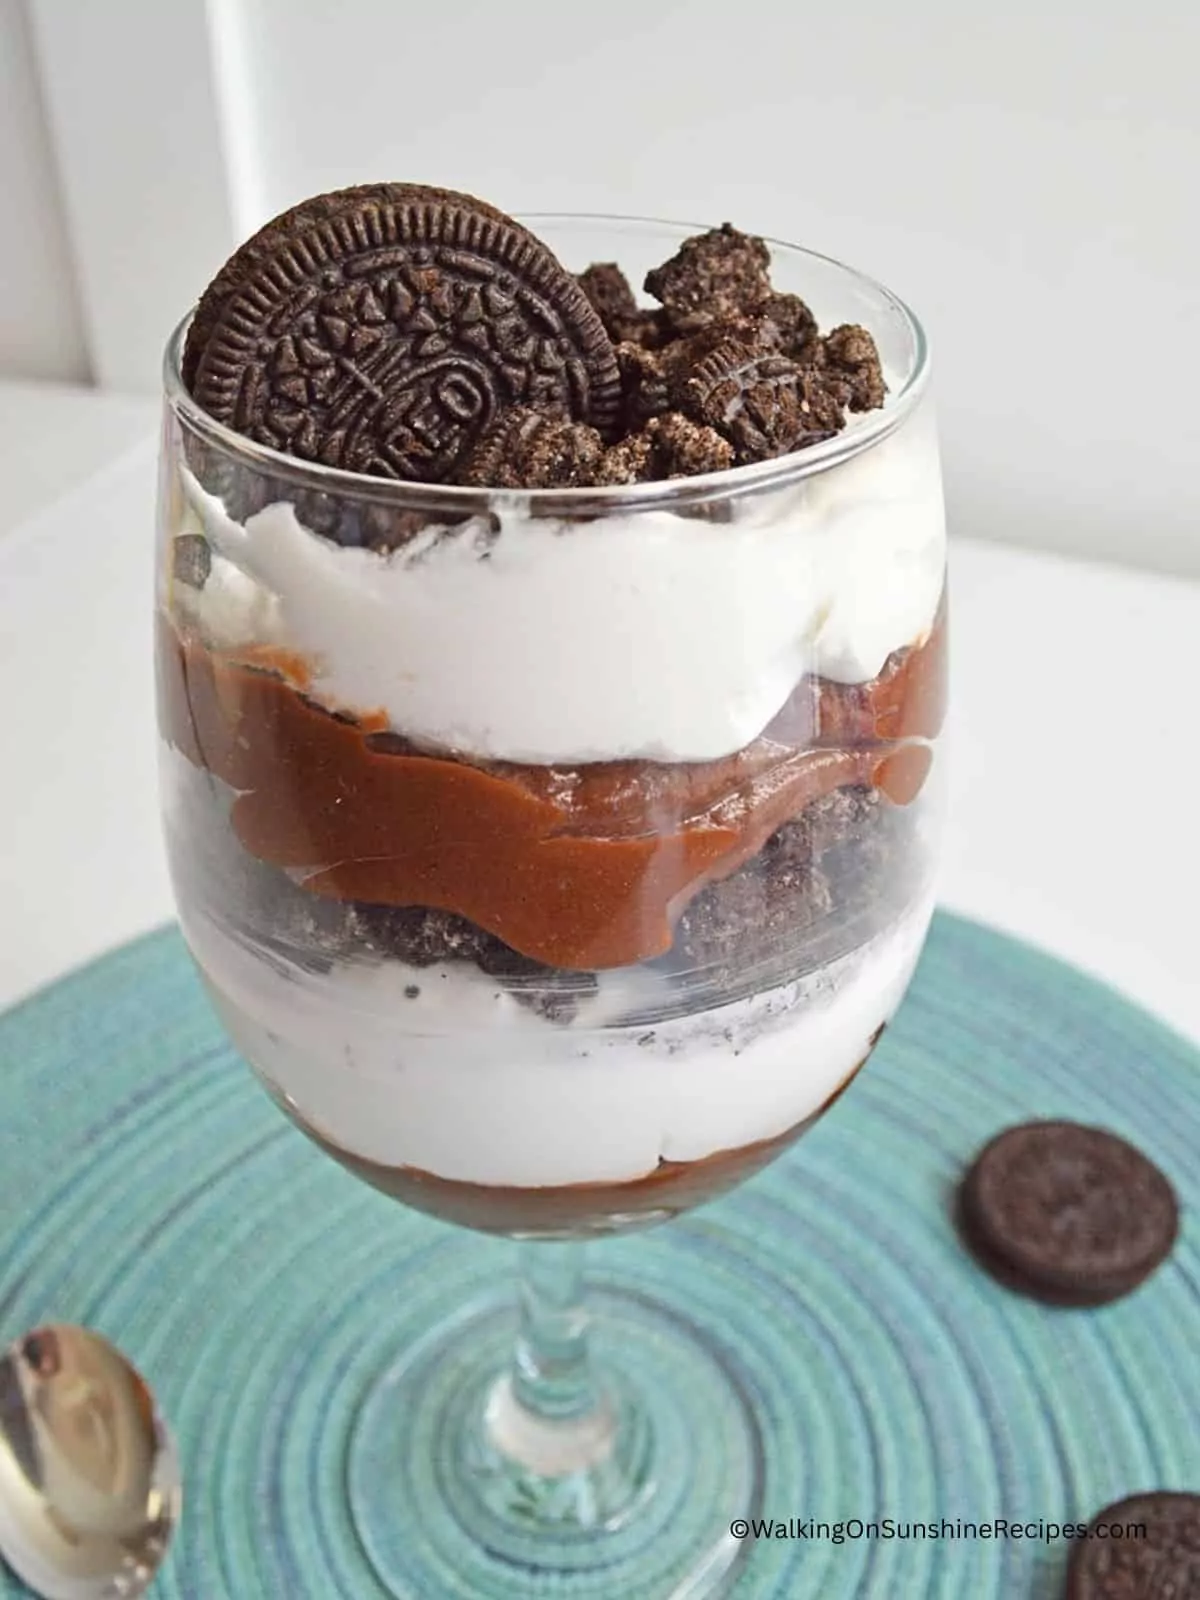 Completed photo of chocolate pudding parfait with whipped cream and Oreo cookies.